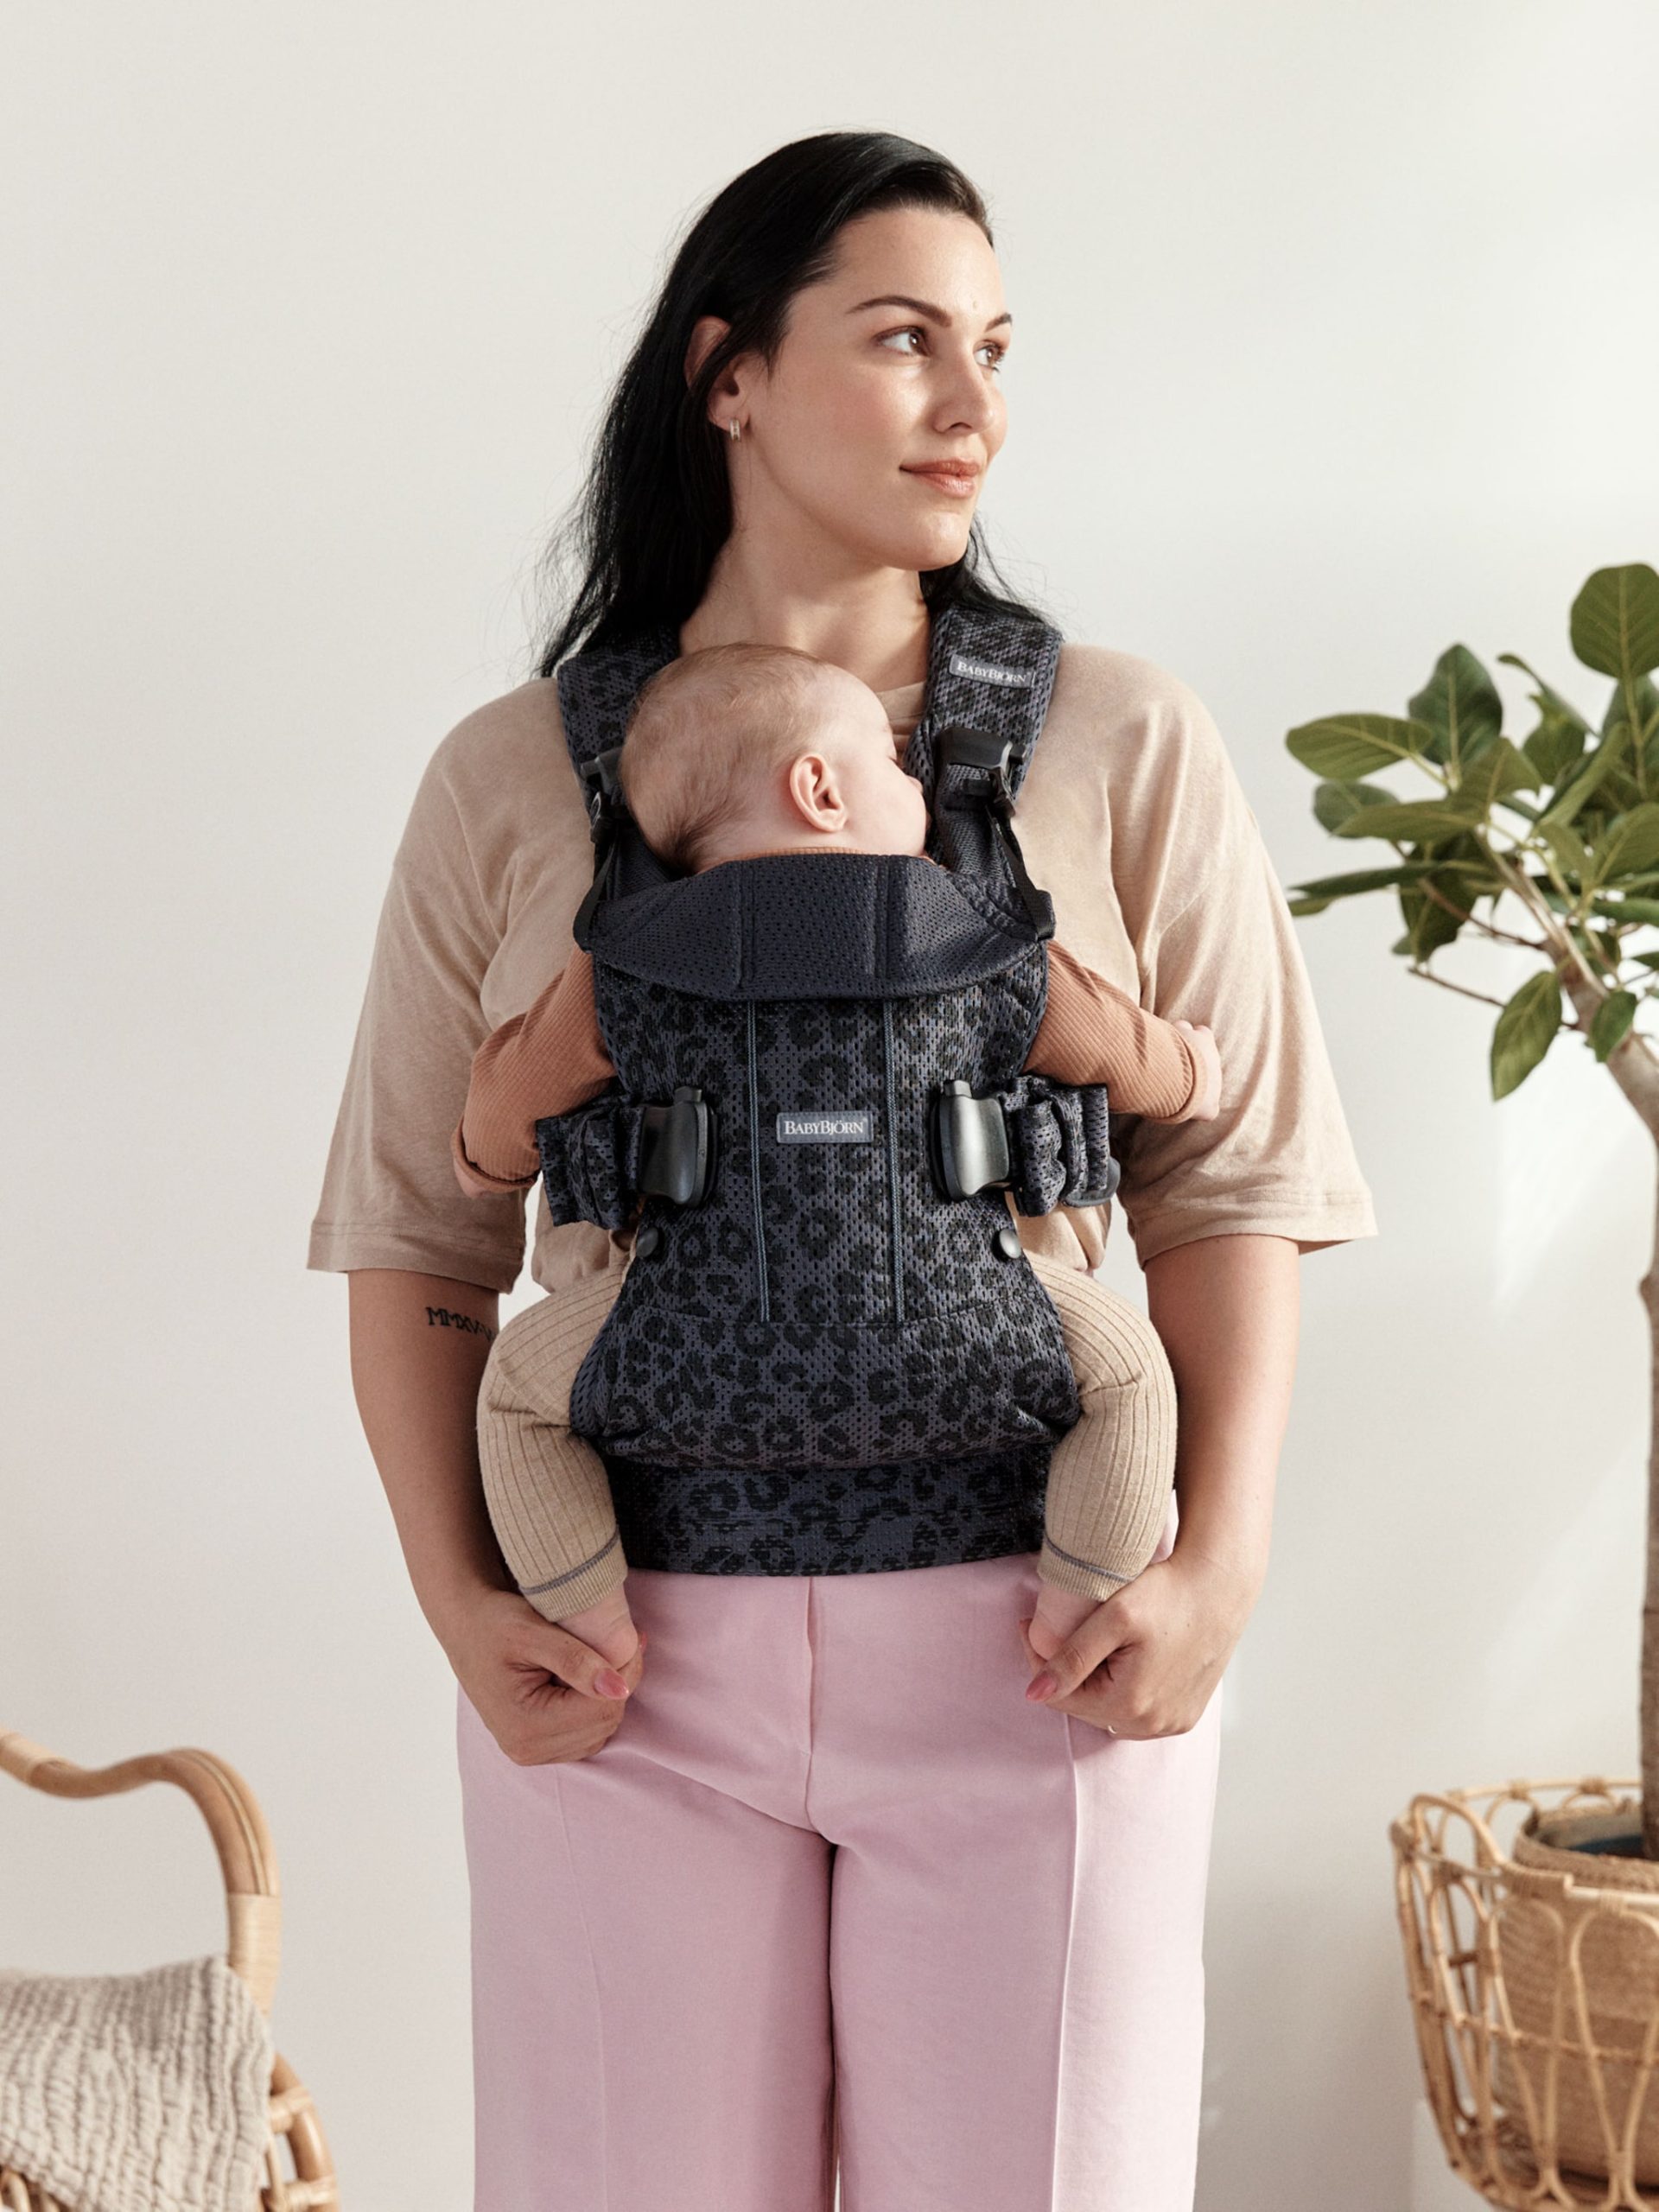 en-gb-098078-babybjorn-baby-carrier-one-air-anthracite-leopard-3d-mesh-01